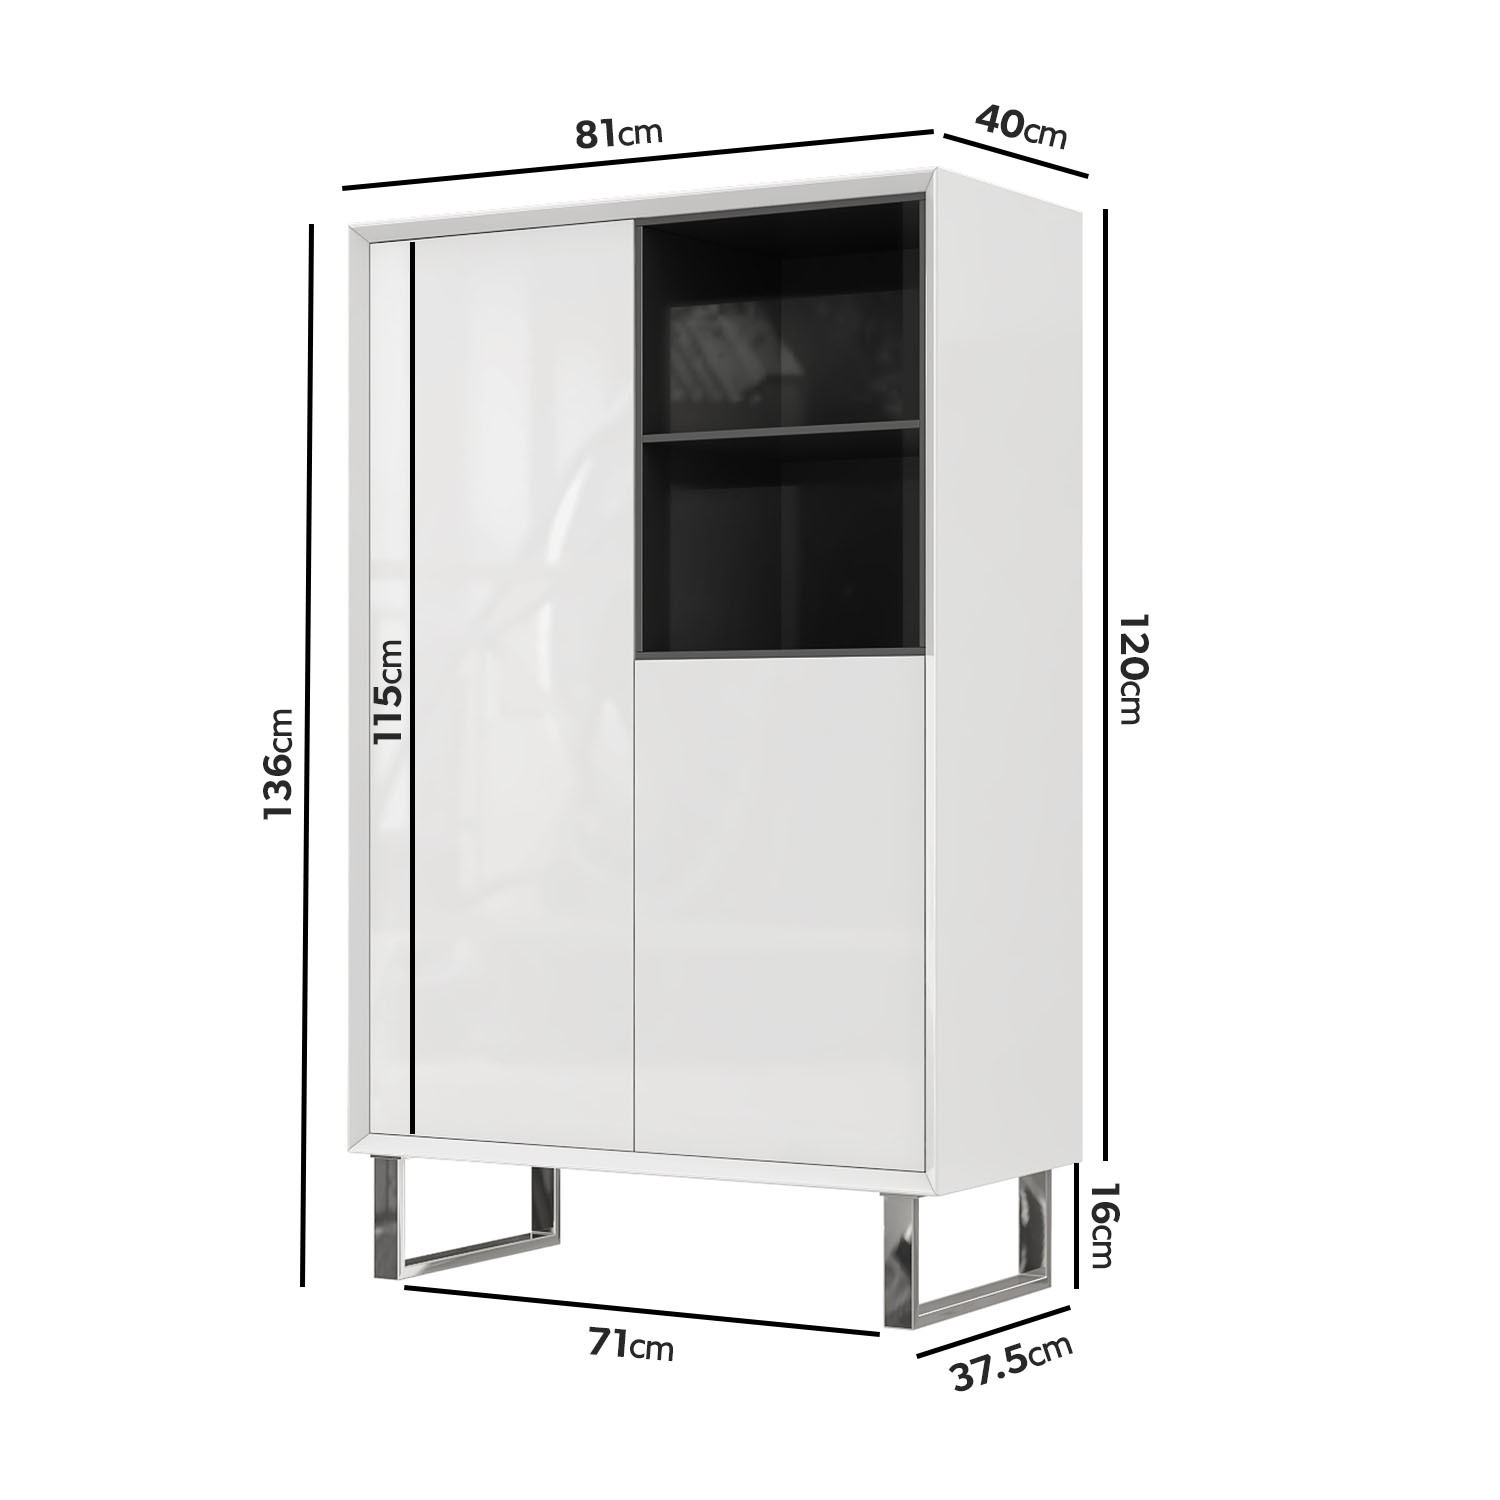 Read more about Large white gloss storage cabinet with shelves paloma